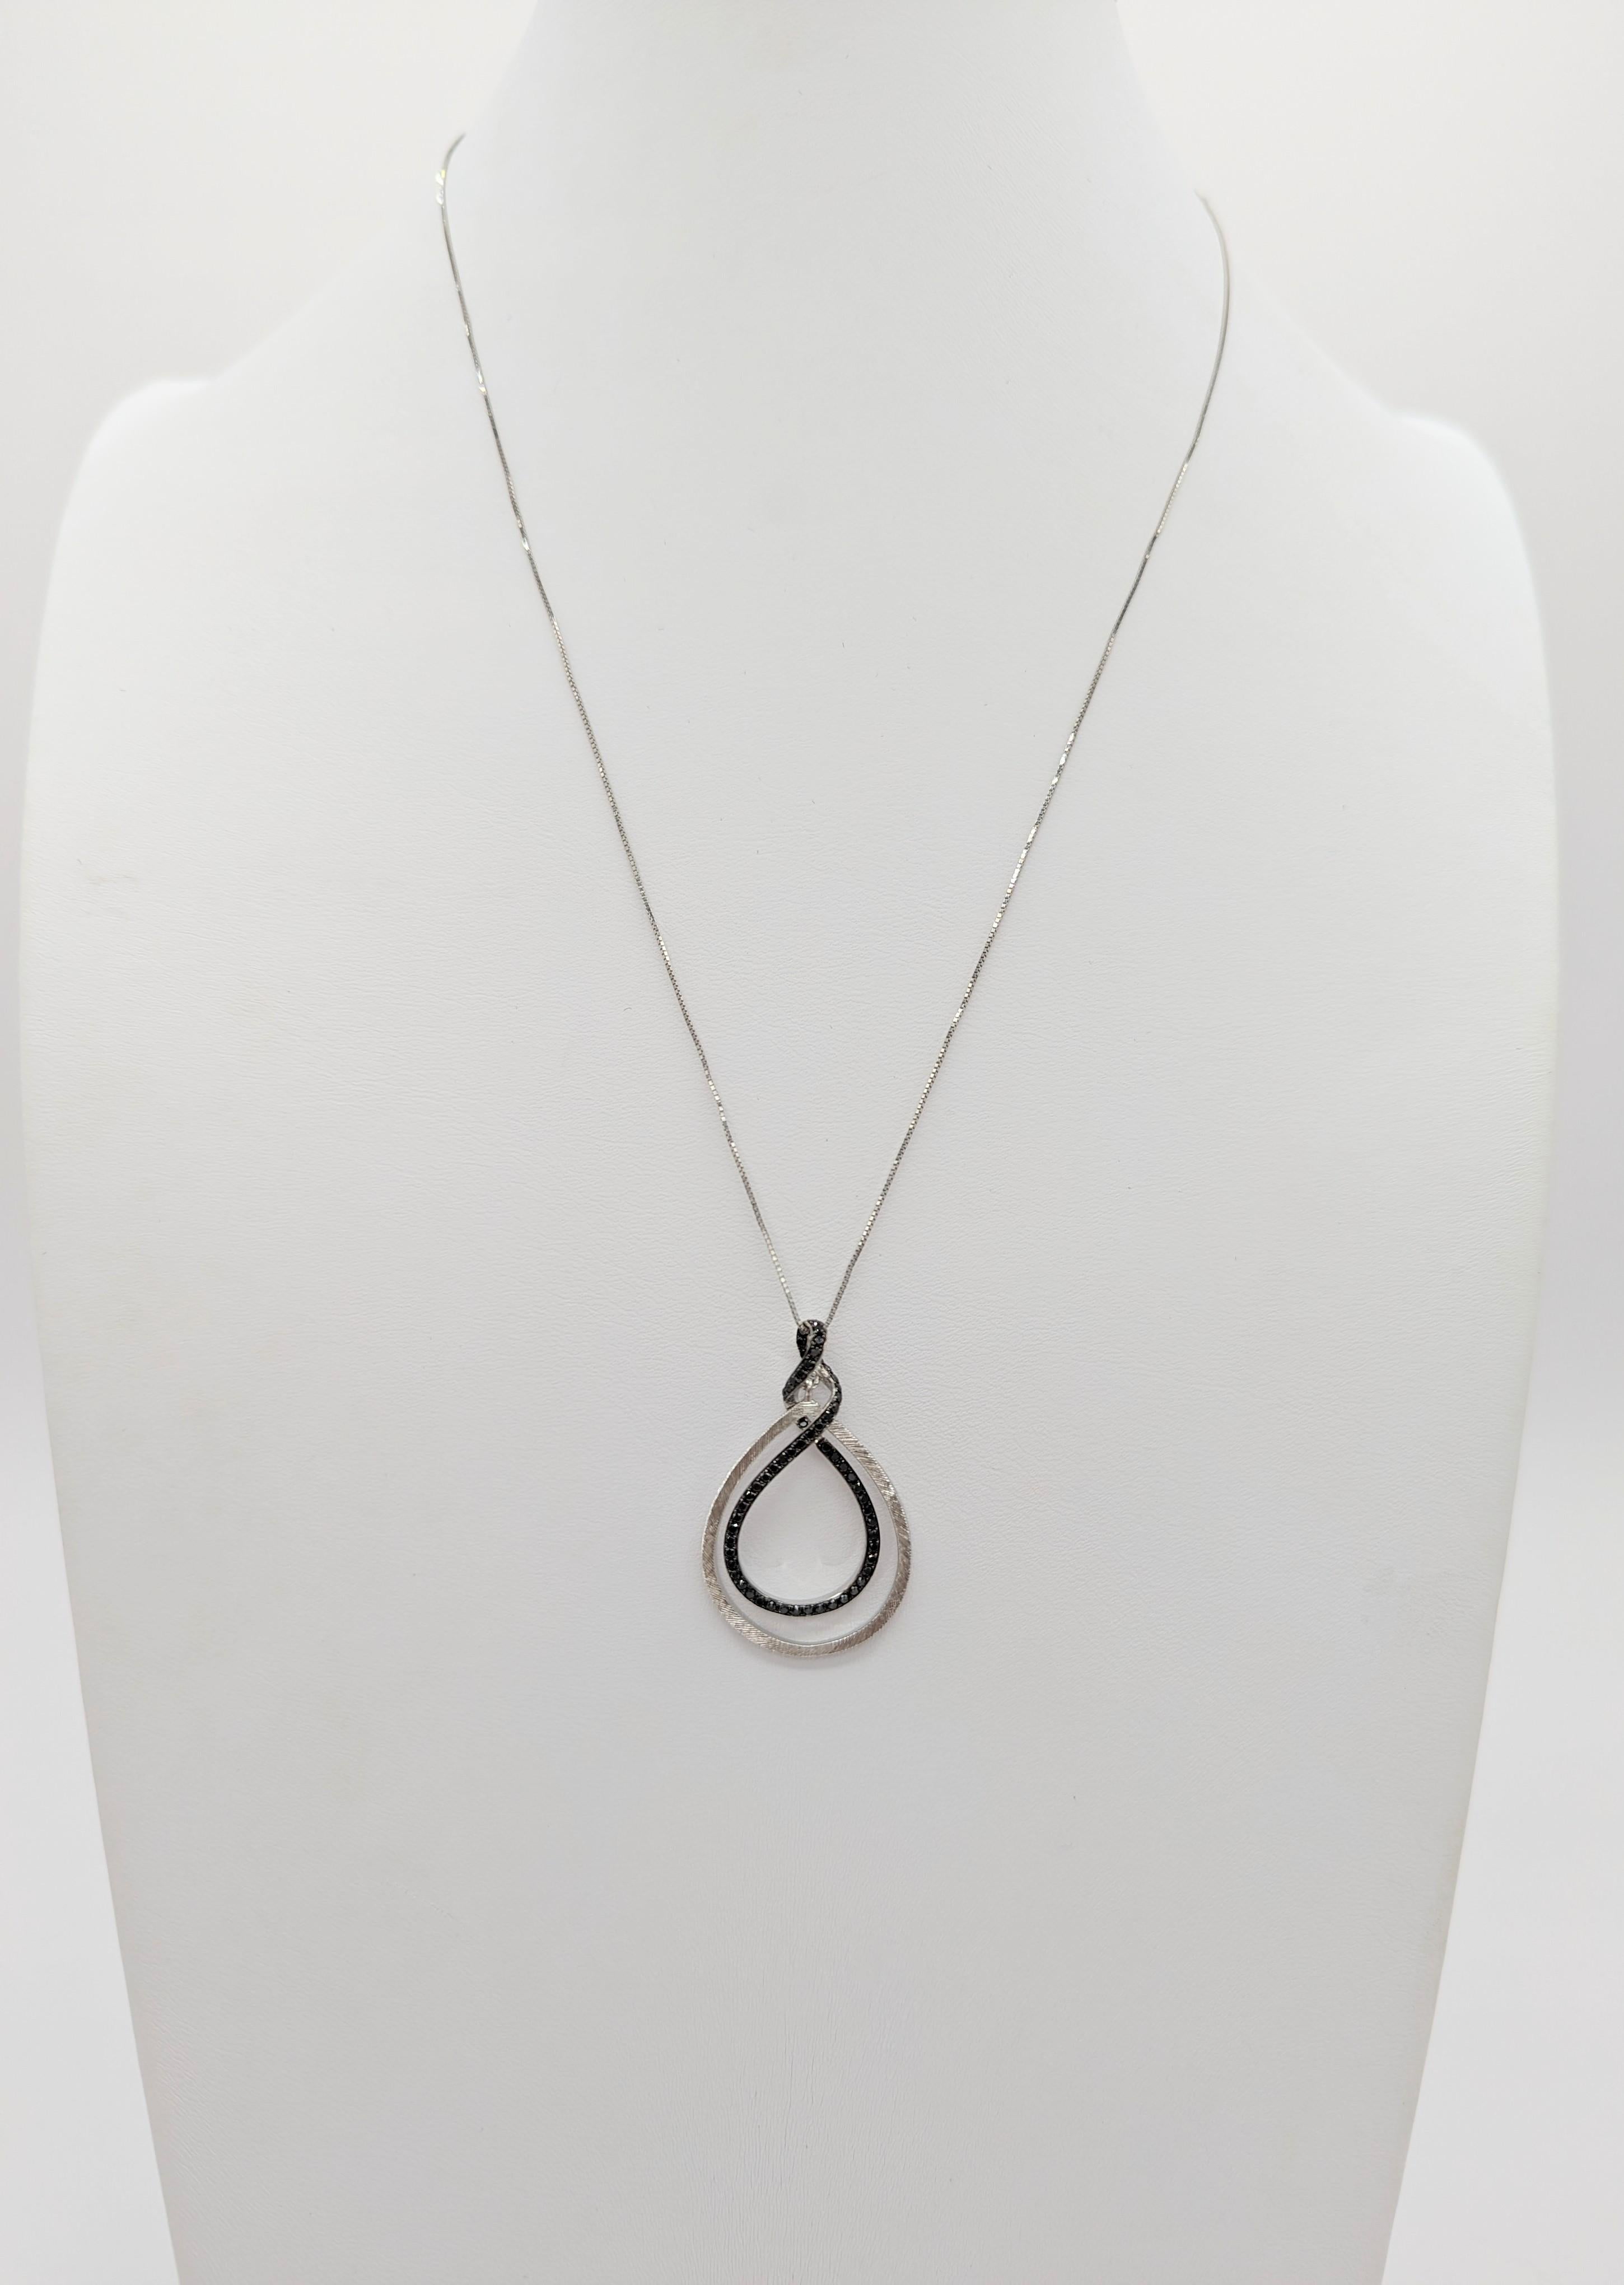 Black Diamond Pendant Necklace in 14K White Gold In New Condition For Sale In Los Angeles, CA